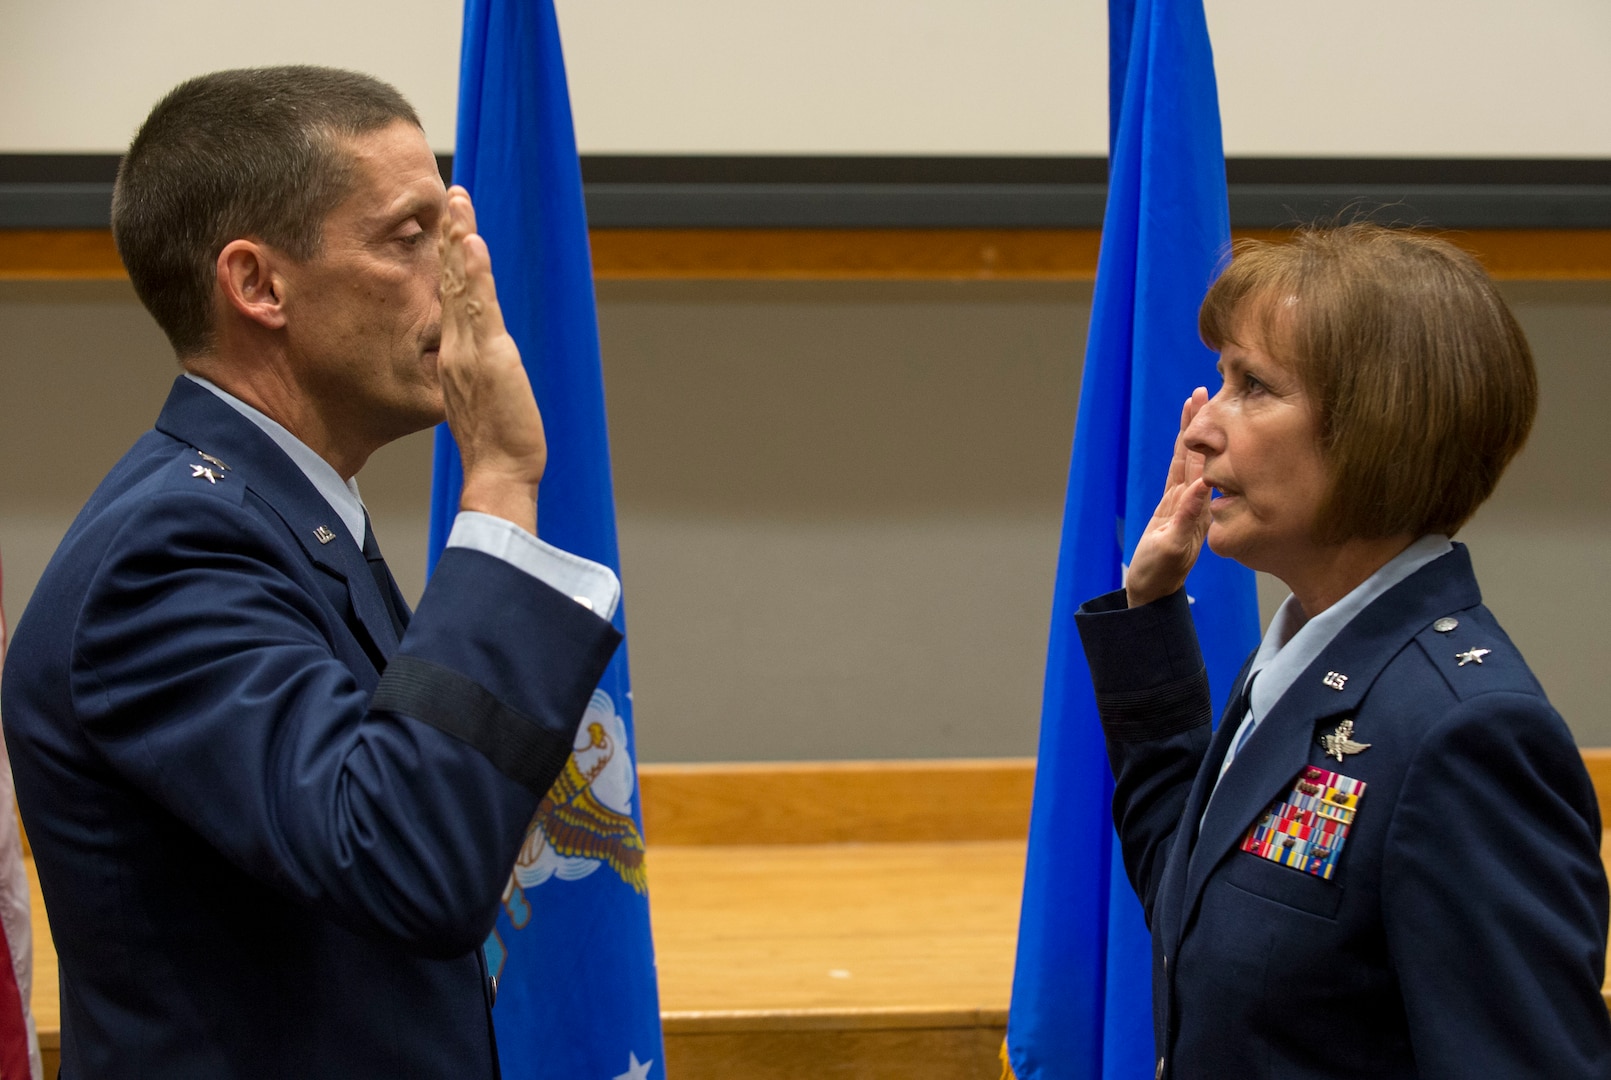 Maj. Gen. Robert Skinner, Air Forces Cyber commander, administers the Oath of Office to Brig. Gen. Michelle Hayworth, AFCYBER vice commander, during her promotion ceremony at Joint Base San Antonio-Lackland July, 16. In June, Hayworth re-joined AFCYBER from Air Force Space Command. She previously served in AFCYBER, most recently as the 688th Cyberspace Wing Commander.